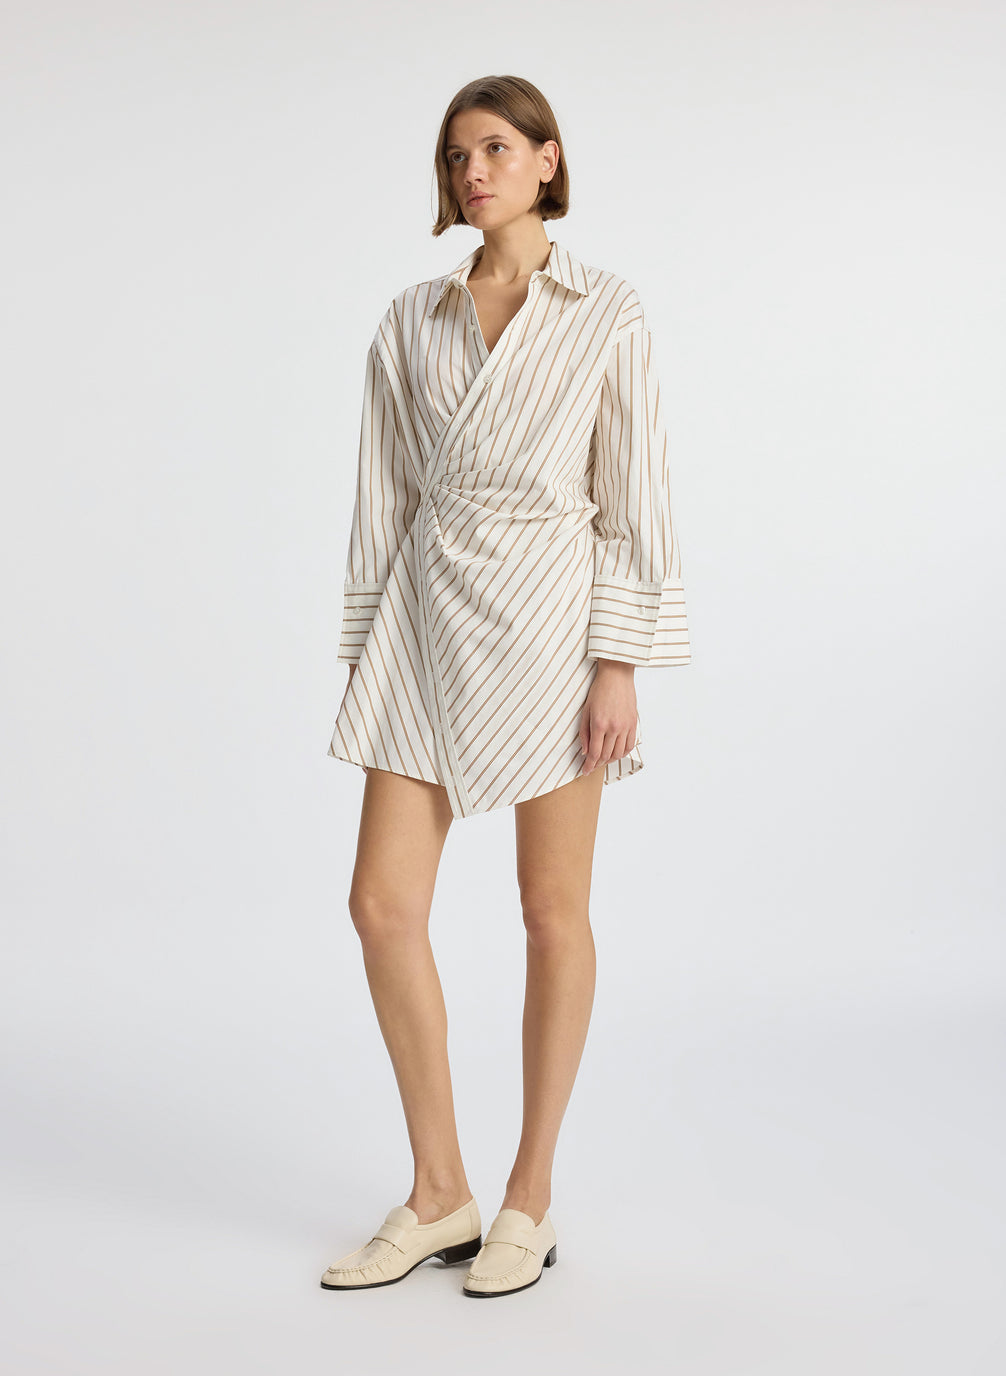 side view of woman wearing cream and brown striped wrapped shirtdress